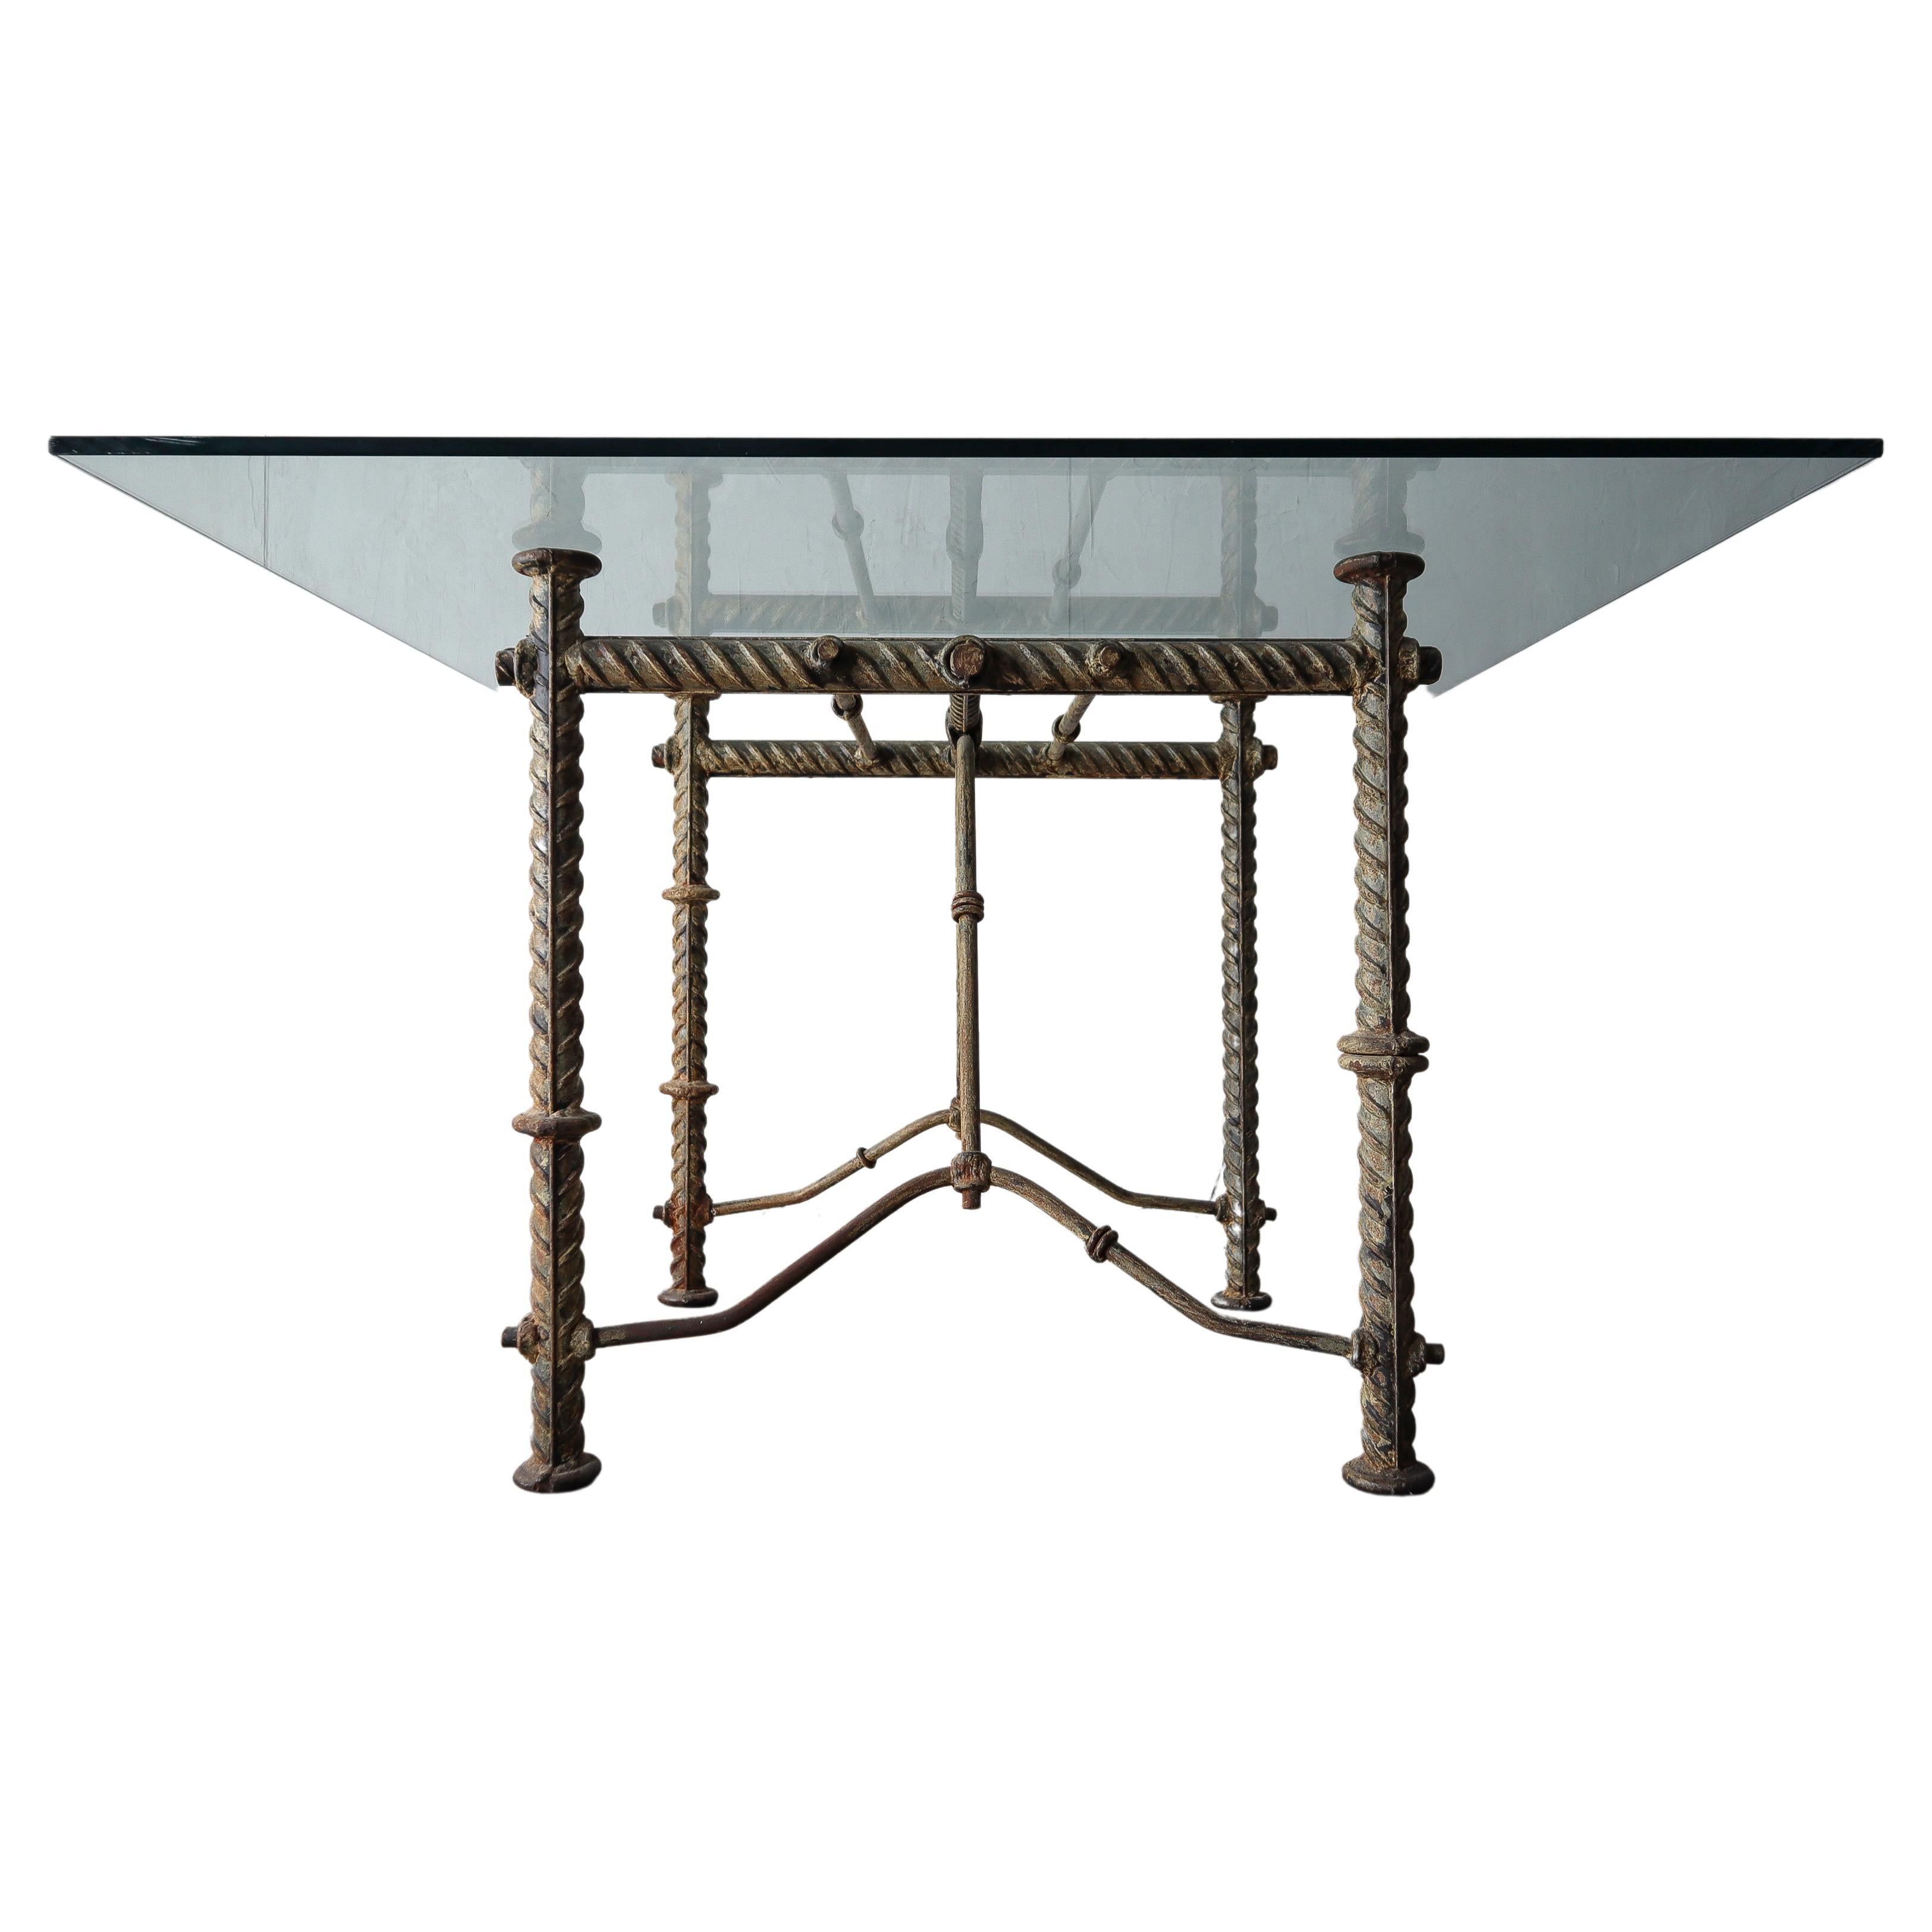 Ilana Goor Handwrought Iron Dining Table Base For Sale